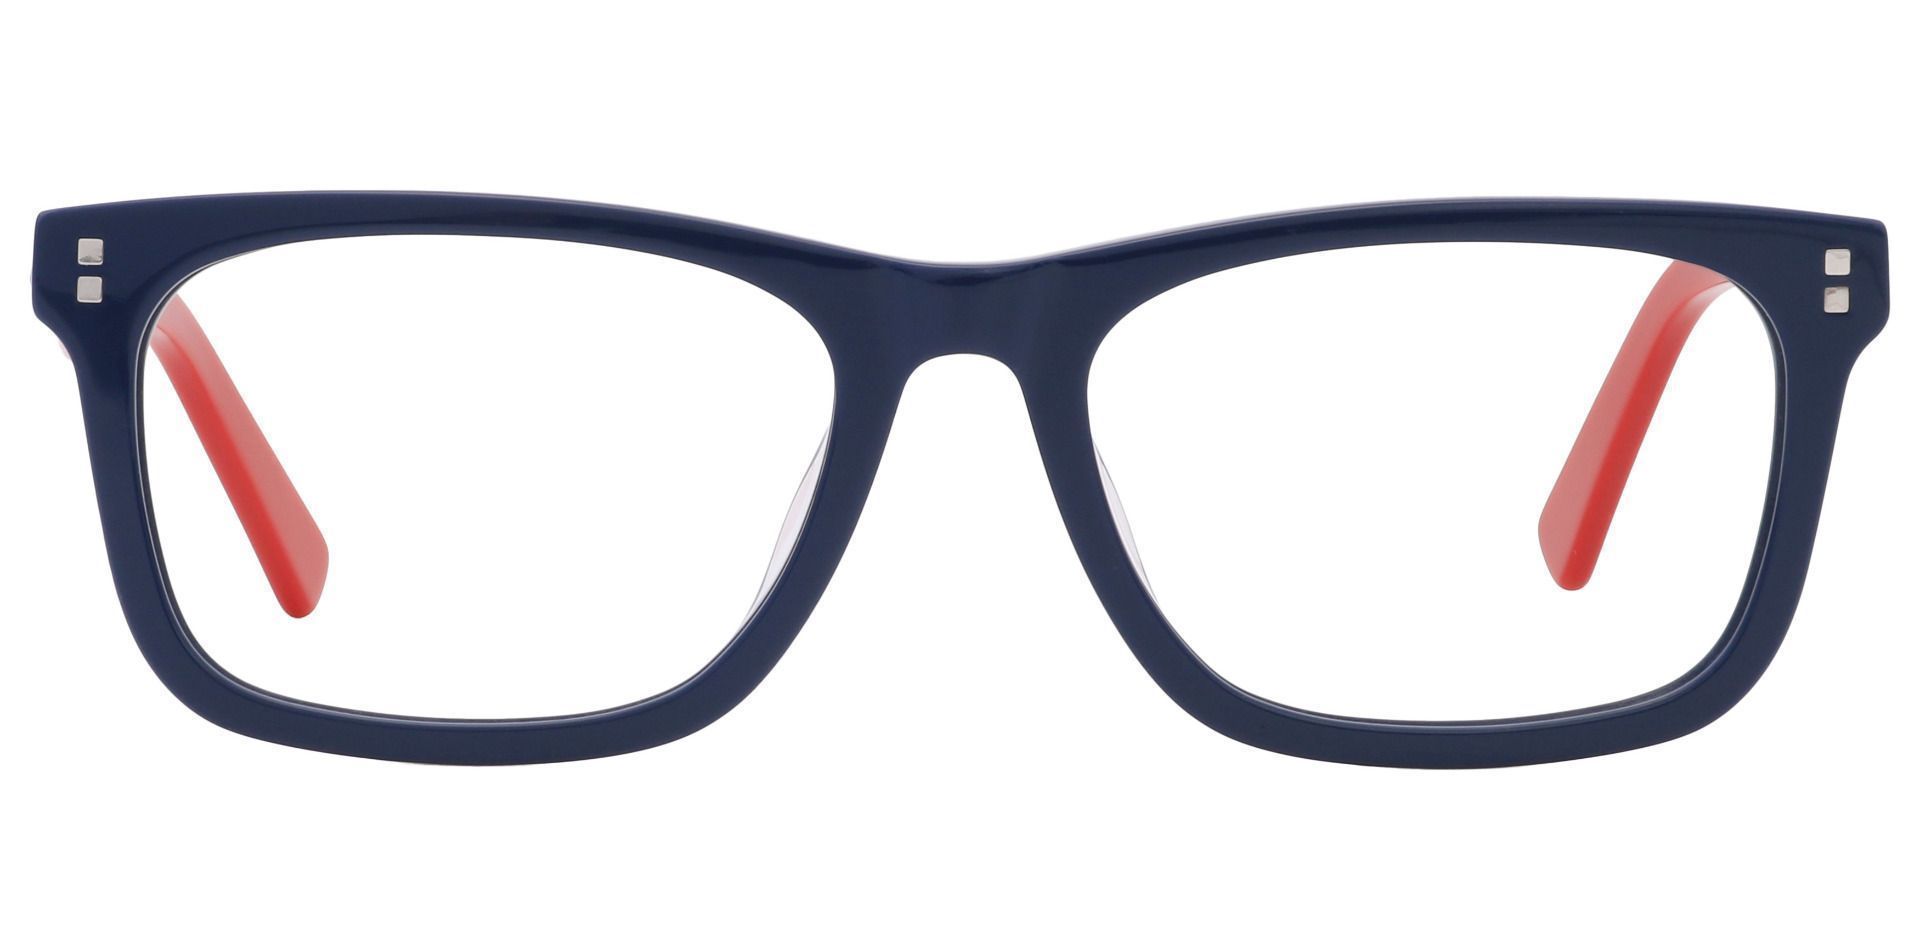 Newbury Rectangle Eyeglasses Frame - The Frame Is Blue And Red